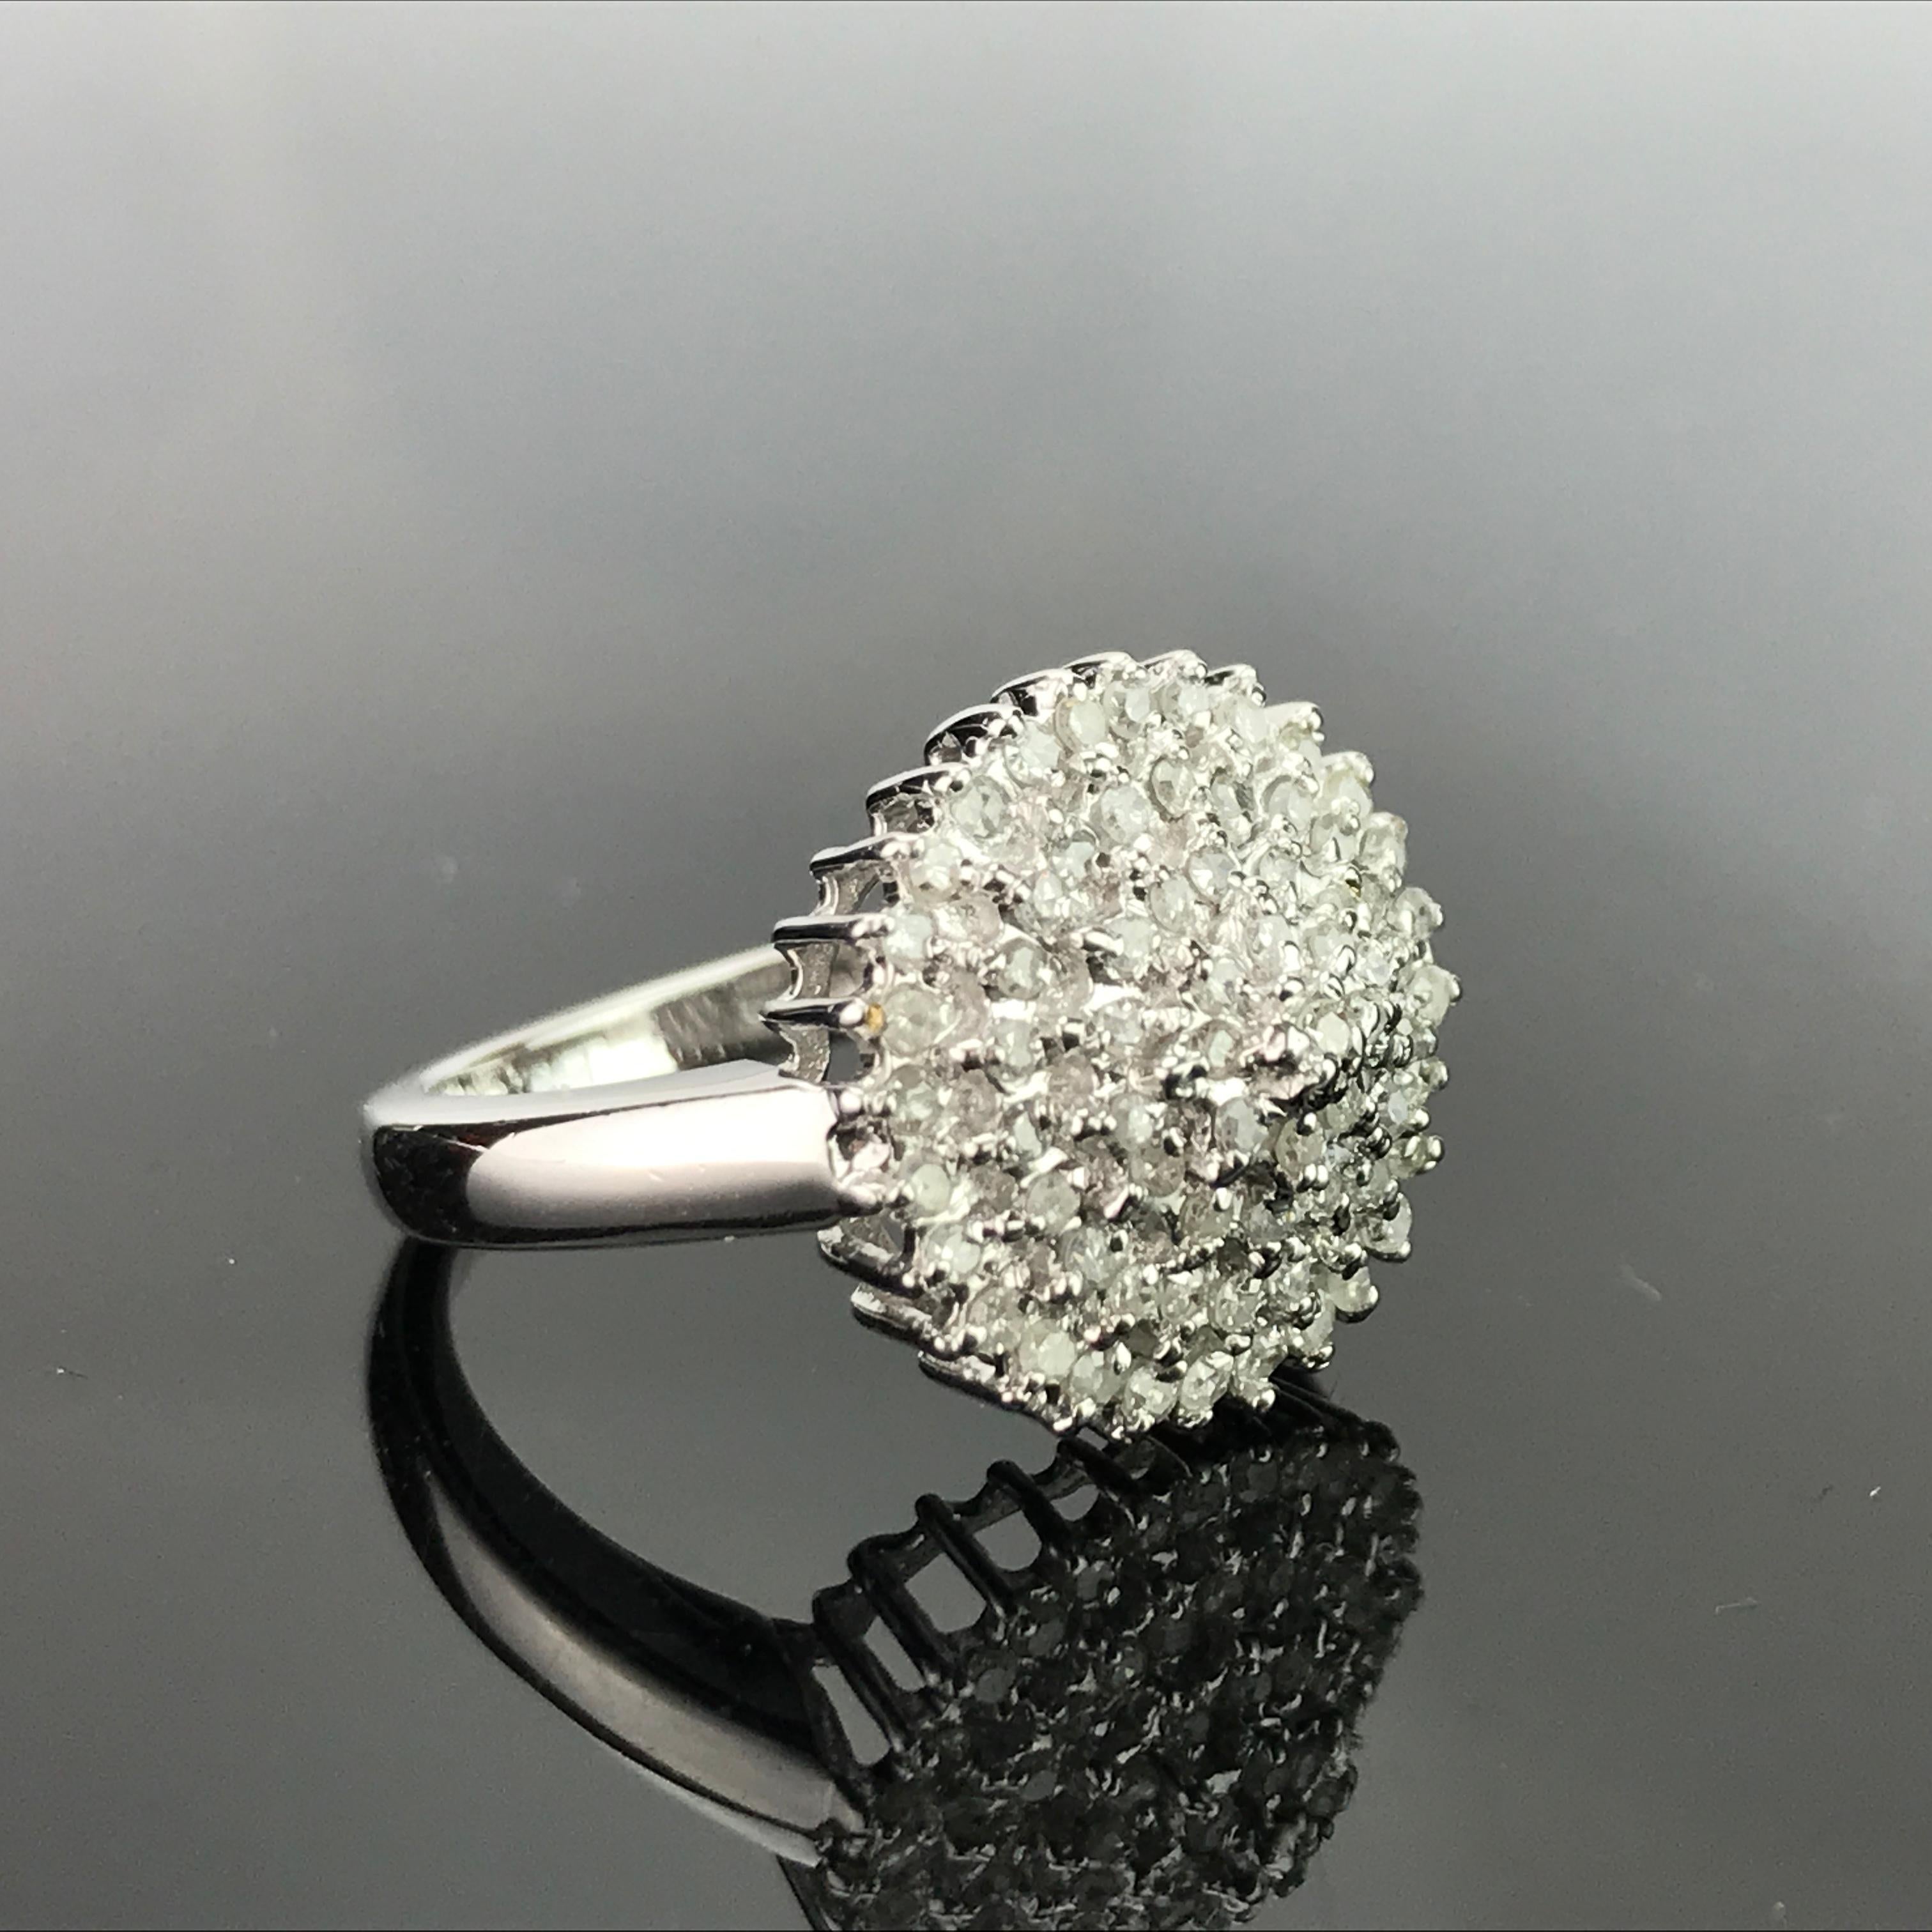 A clustered 0.5 carat White Diamond Ring all set in 14K White Gold. Ring size can be altered according to the client.

